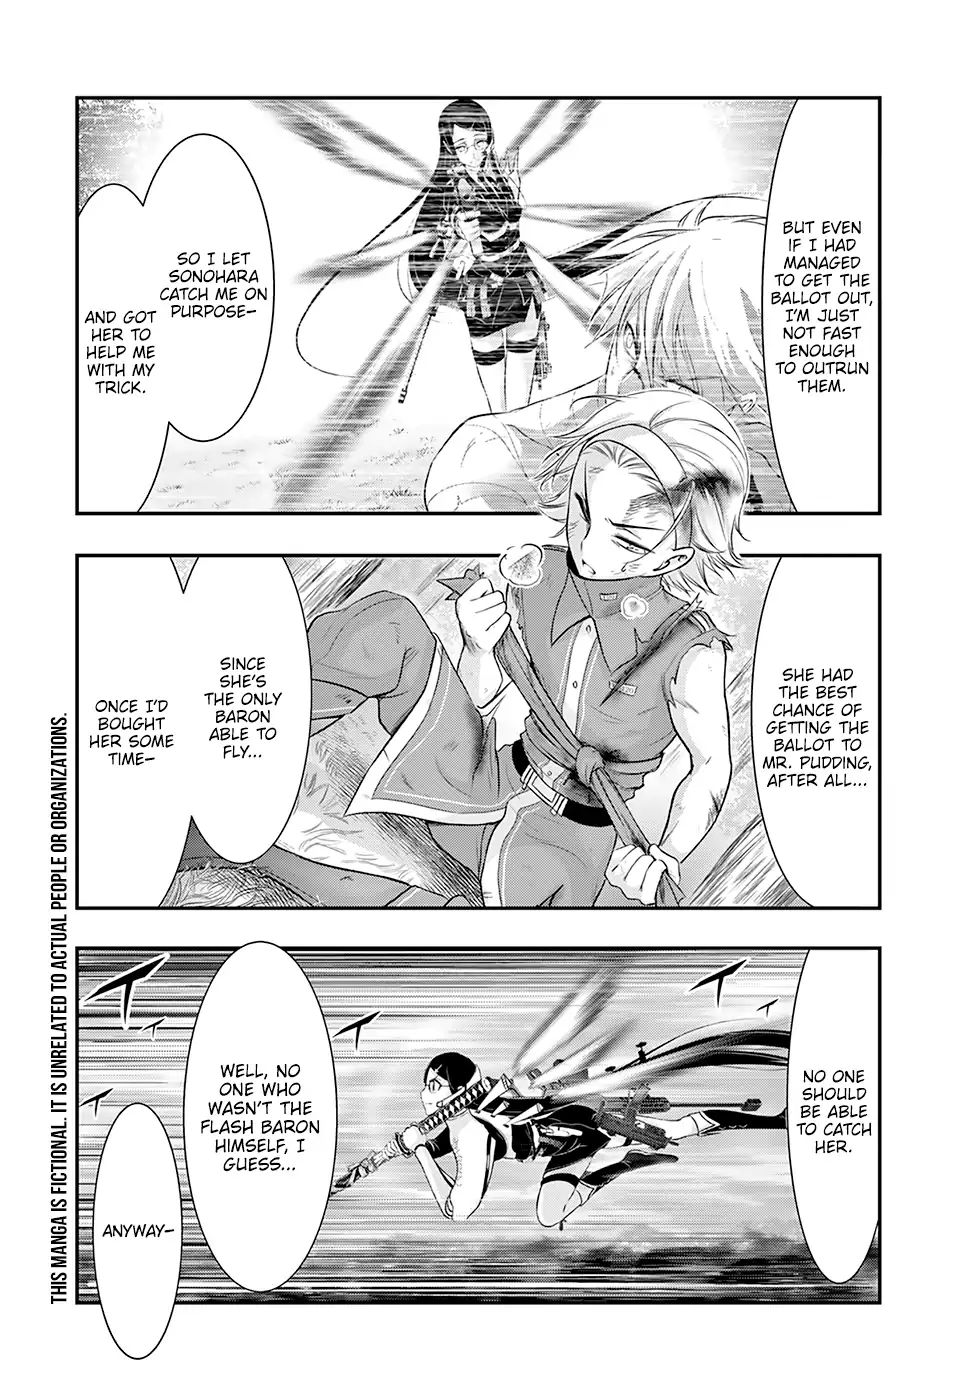 Plunderer Vol.13 Chapter 51: Counterattack